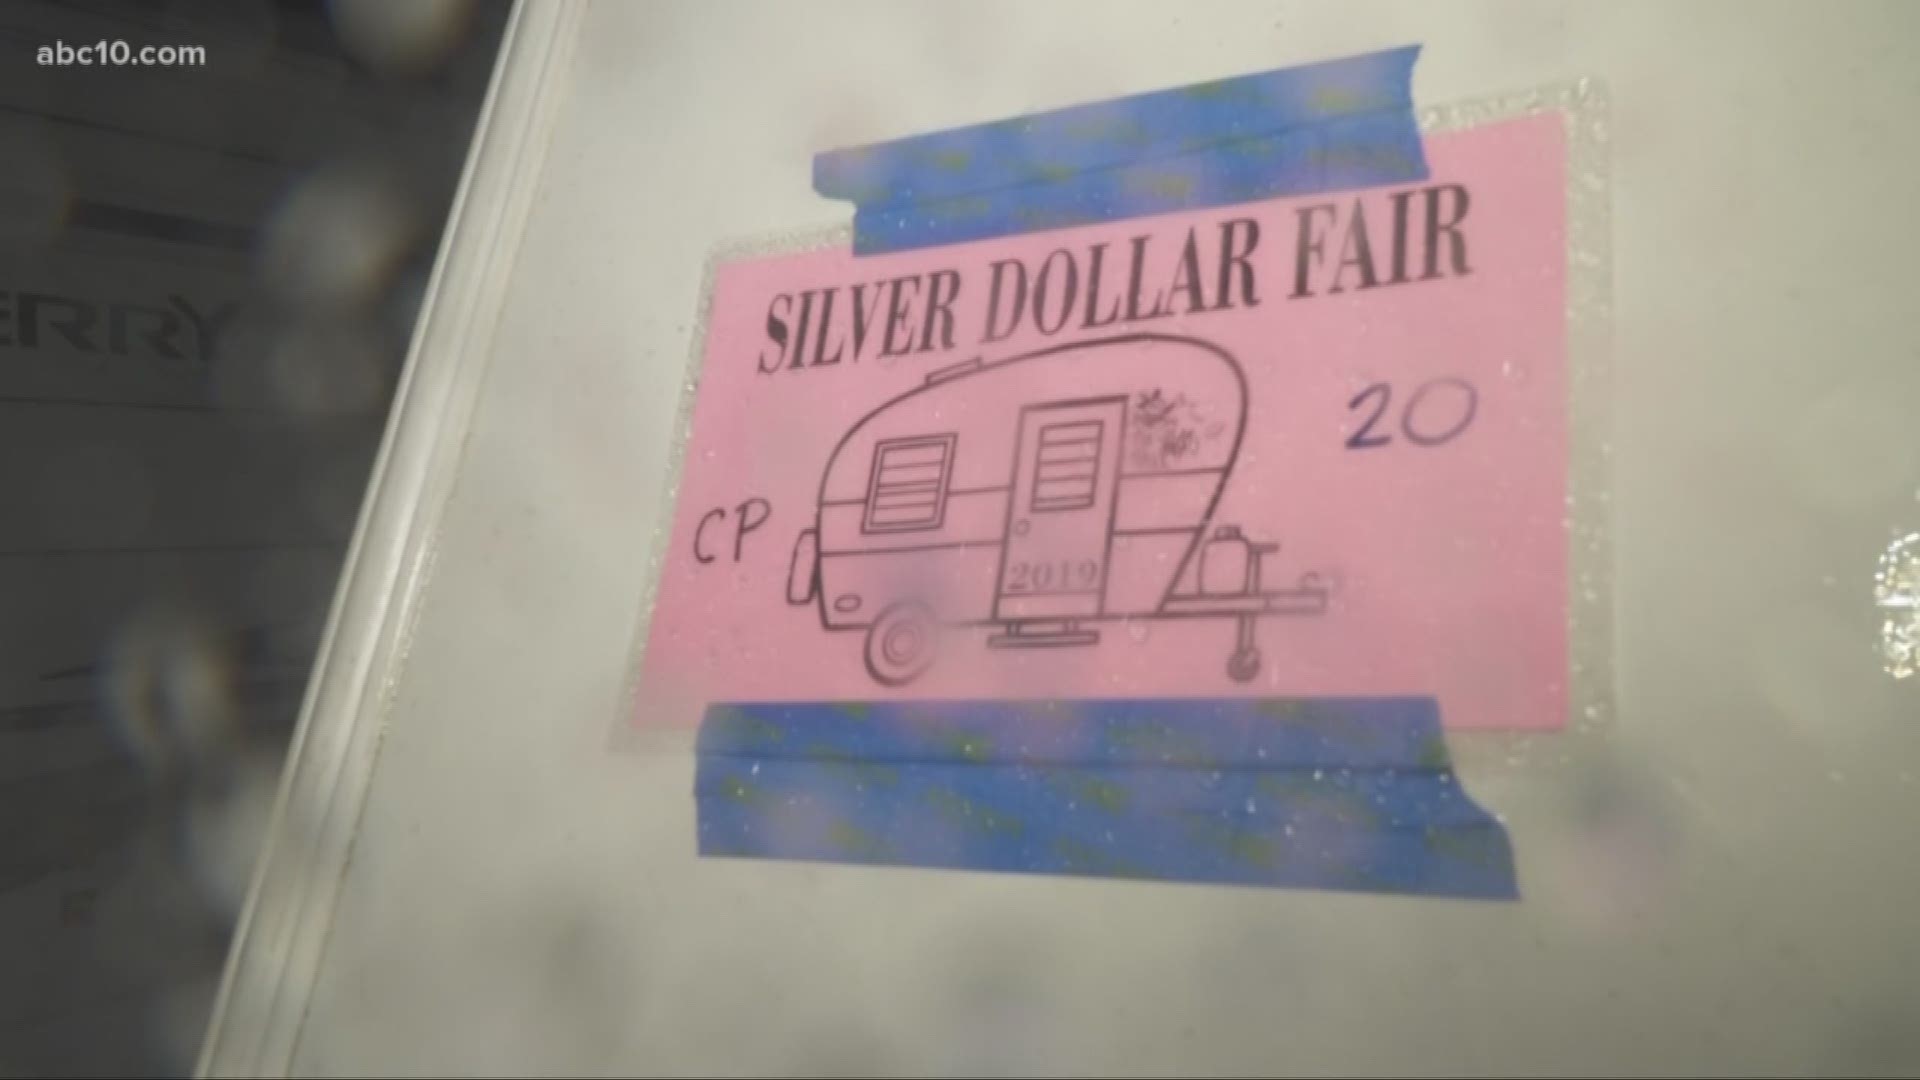 Camp Fire survivors staying at the Silver Dollar Fairgrounds are finding their temporary living situation impacted by the Northern California storms.